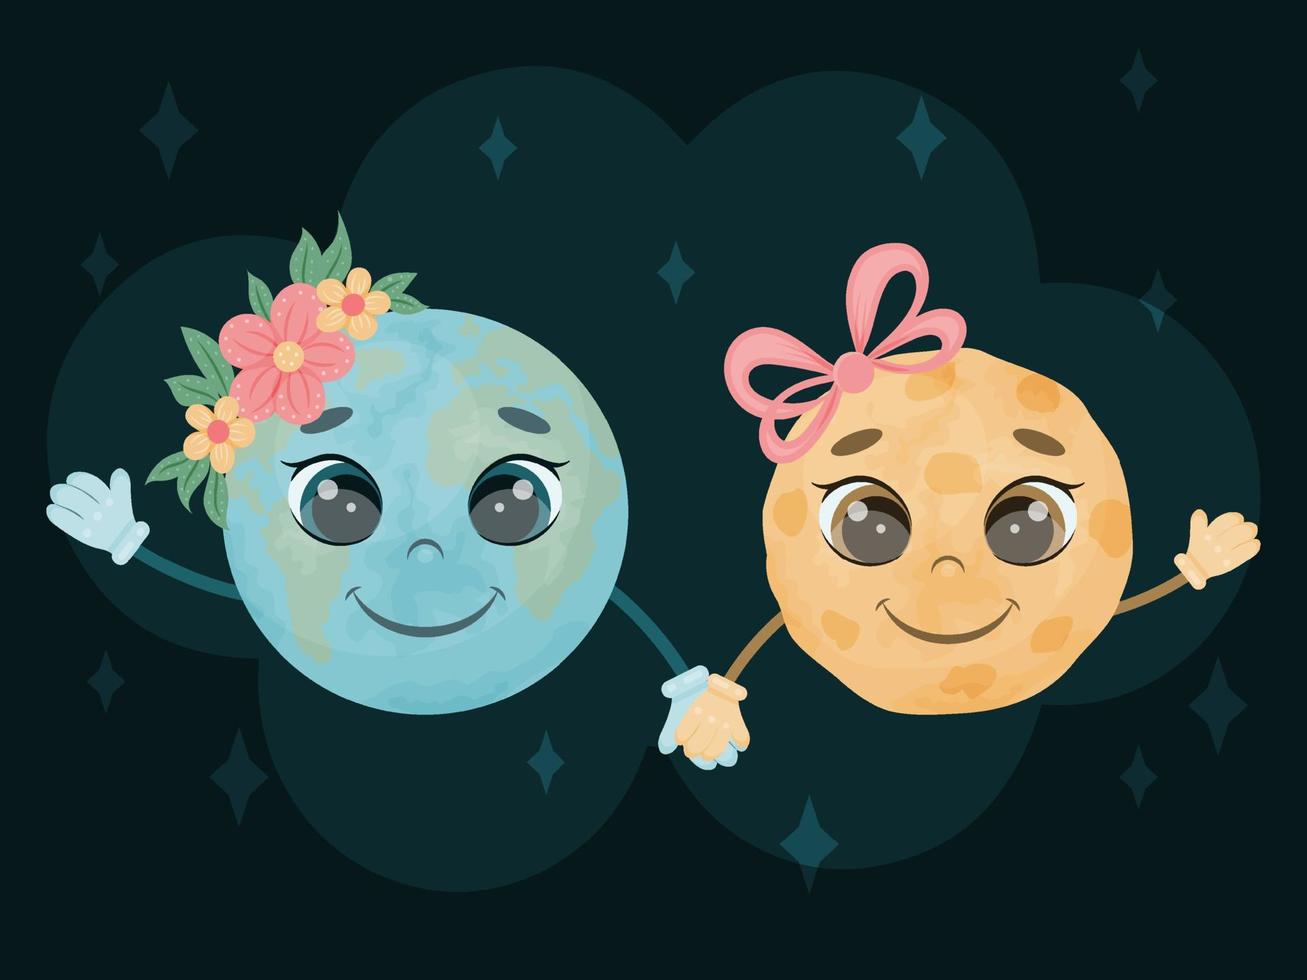 Cute characters. Fairy tale earth and moon are hold hands and smile into space. A child picture. Vector illustration. Cartoon style.